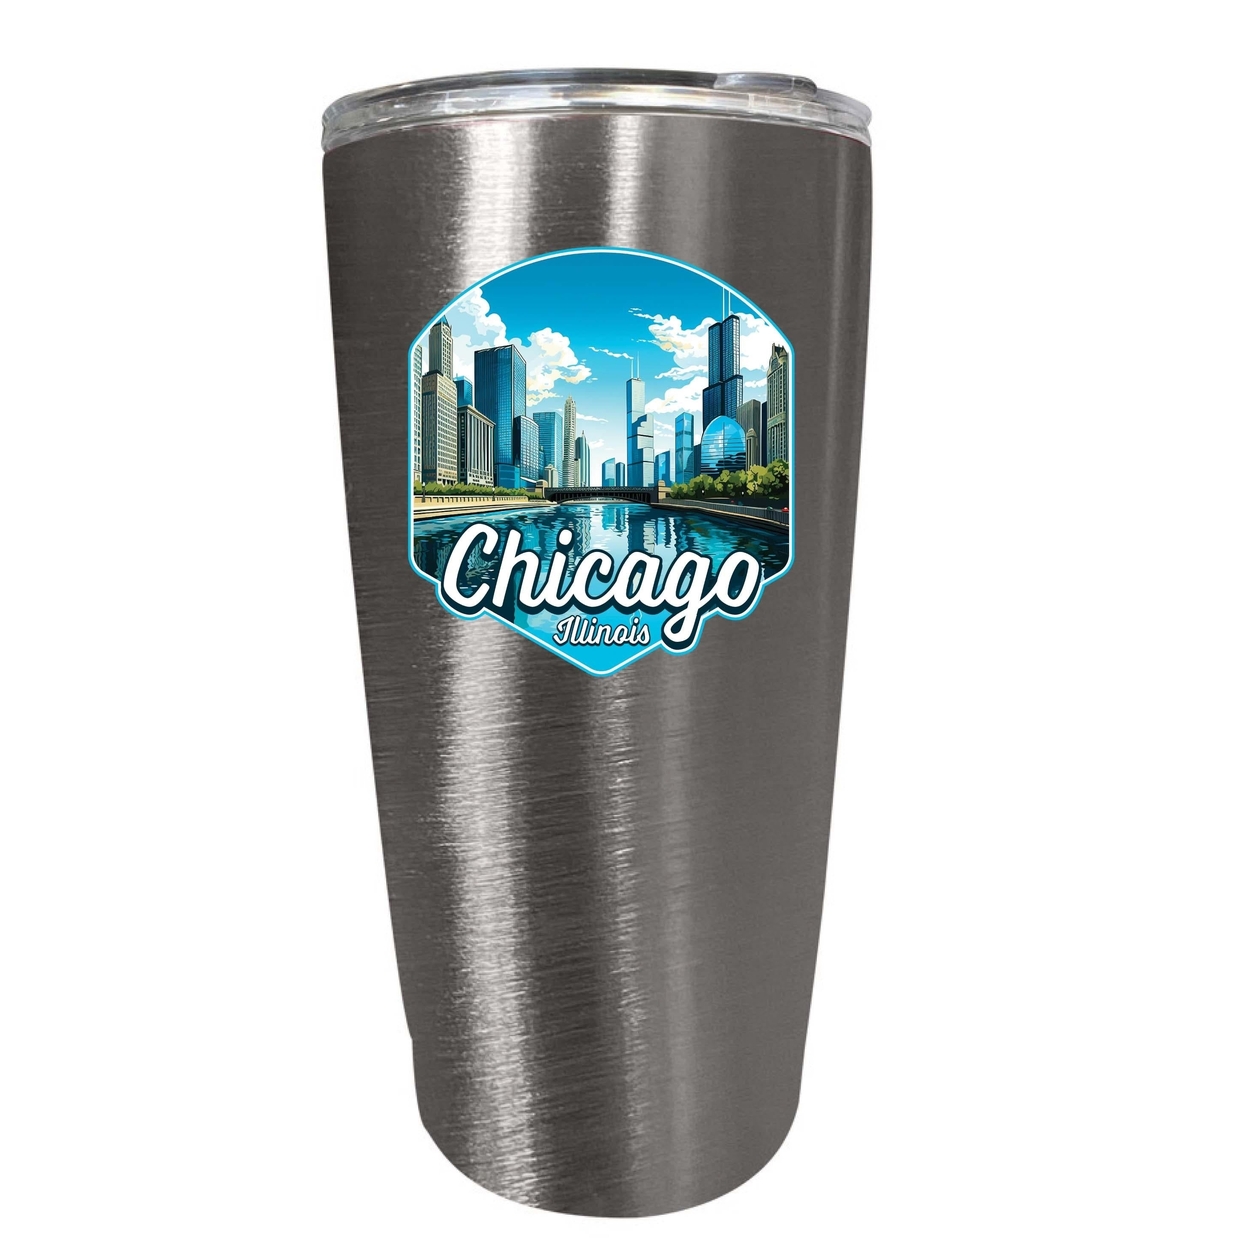 Chicago Illinois A Souvenir 16 Oz Insulated Tumbler - Stainless Steel,,4-Pack